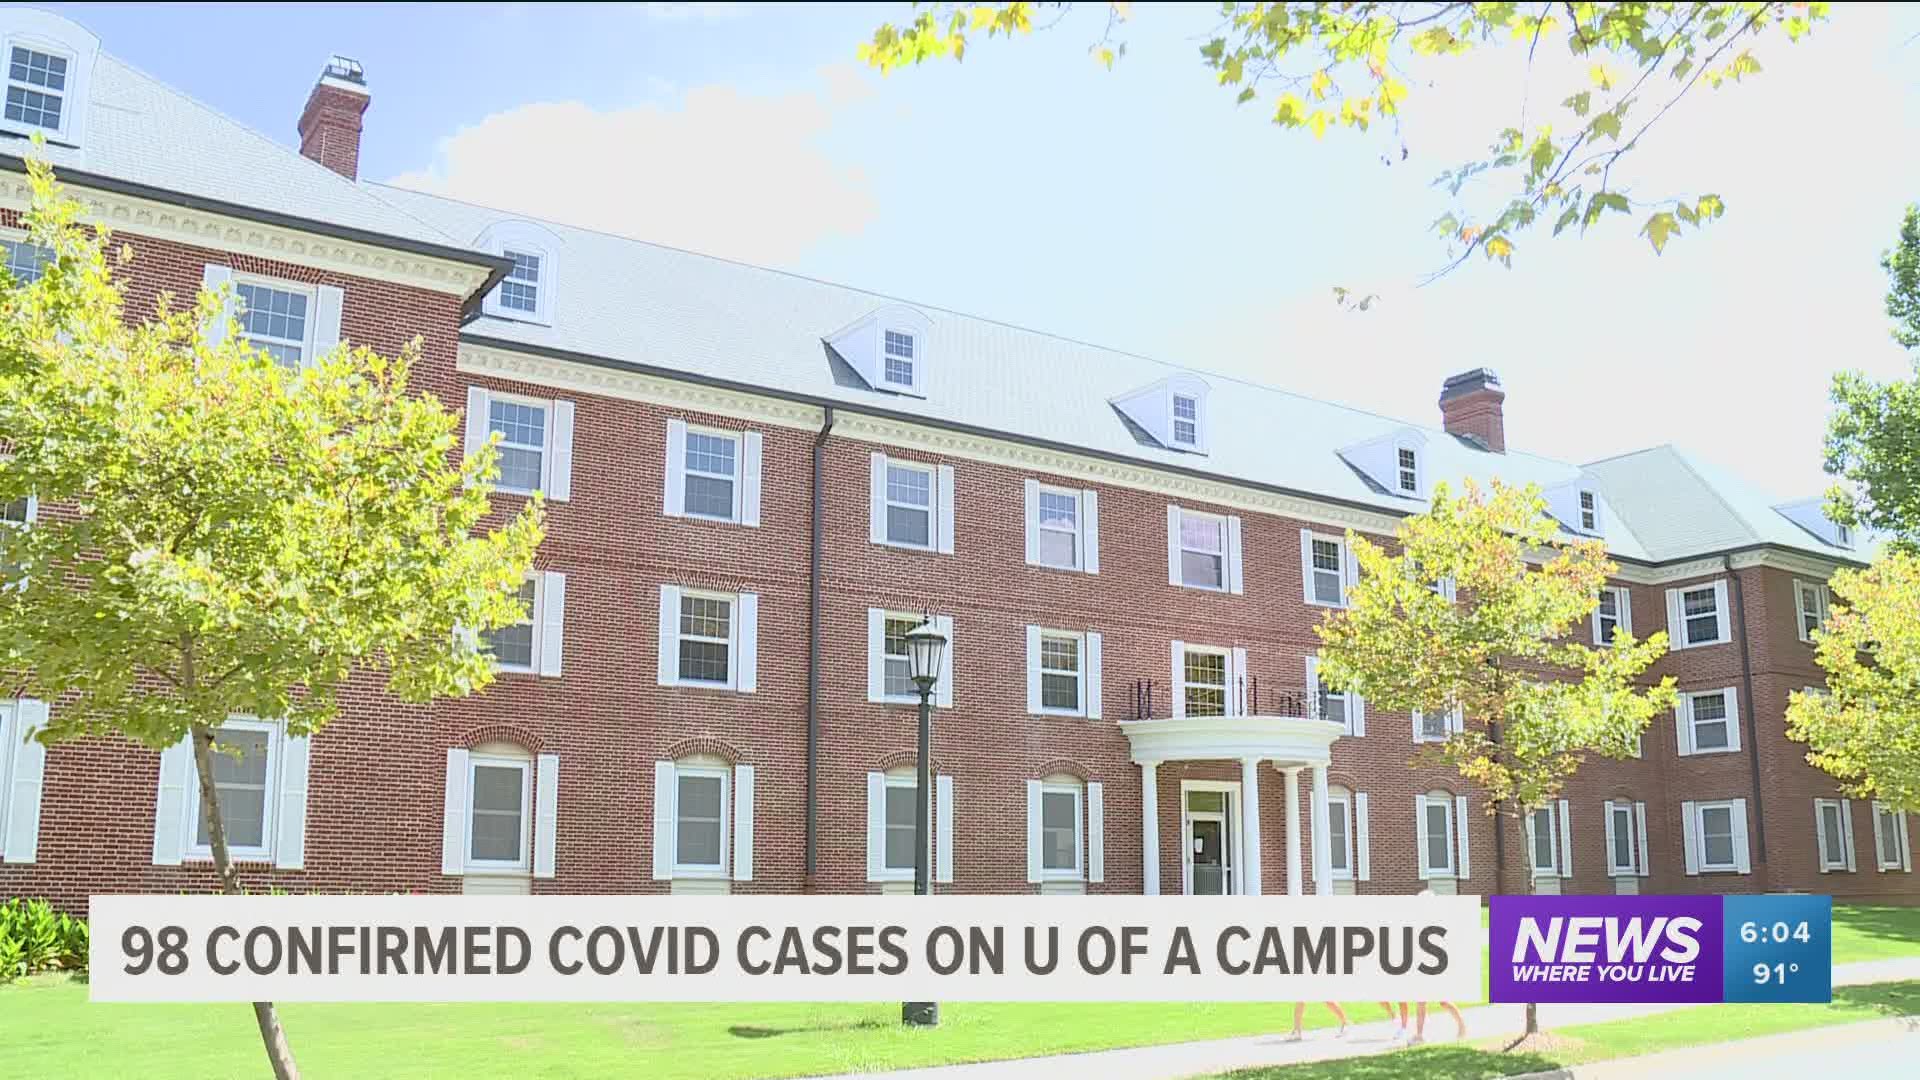 260 beds spaced throughout campus have been set aside for students in the event they need to isolate or quarantine.